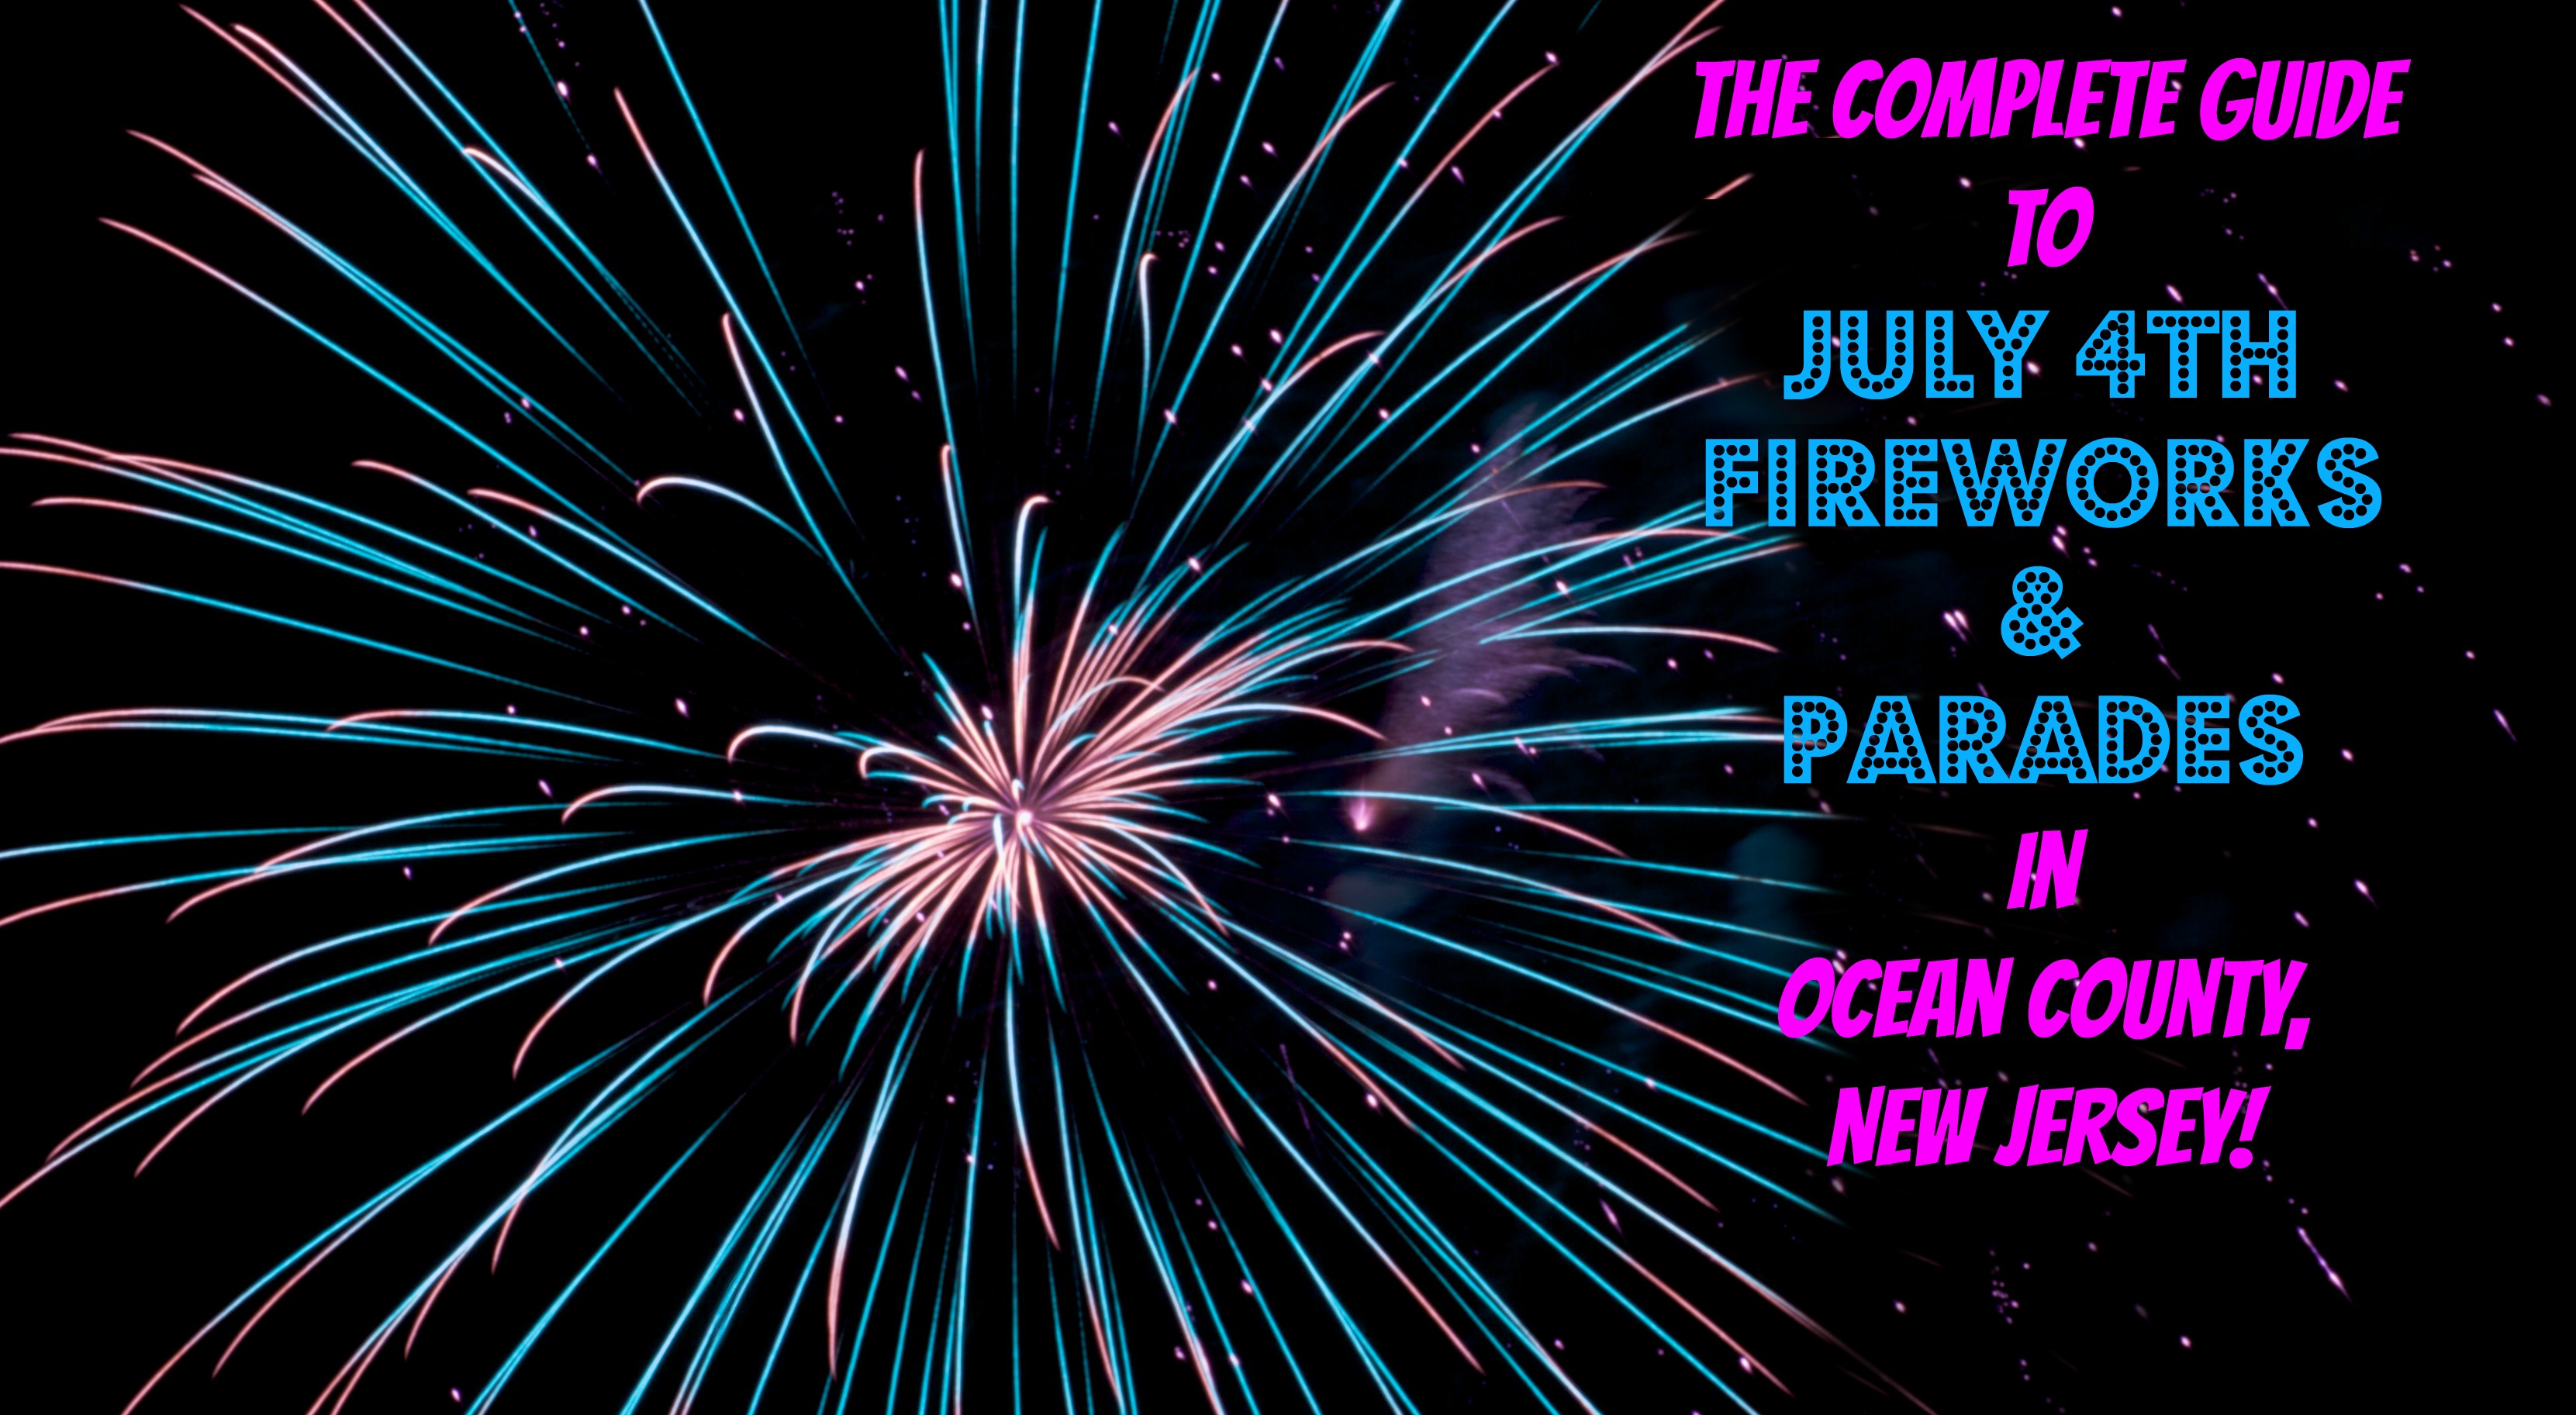 The Complete Guide to July 4th Fireworks in Ocean County NJ 2018